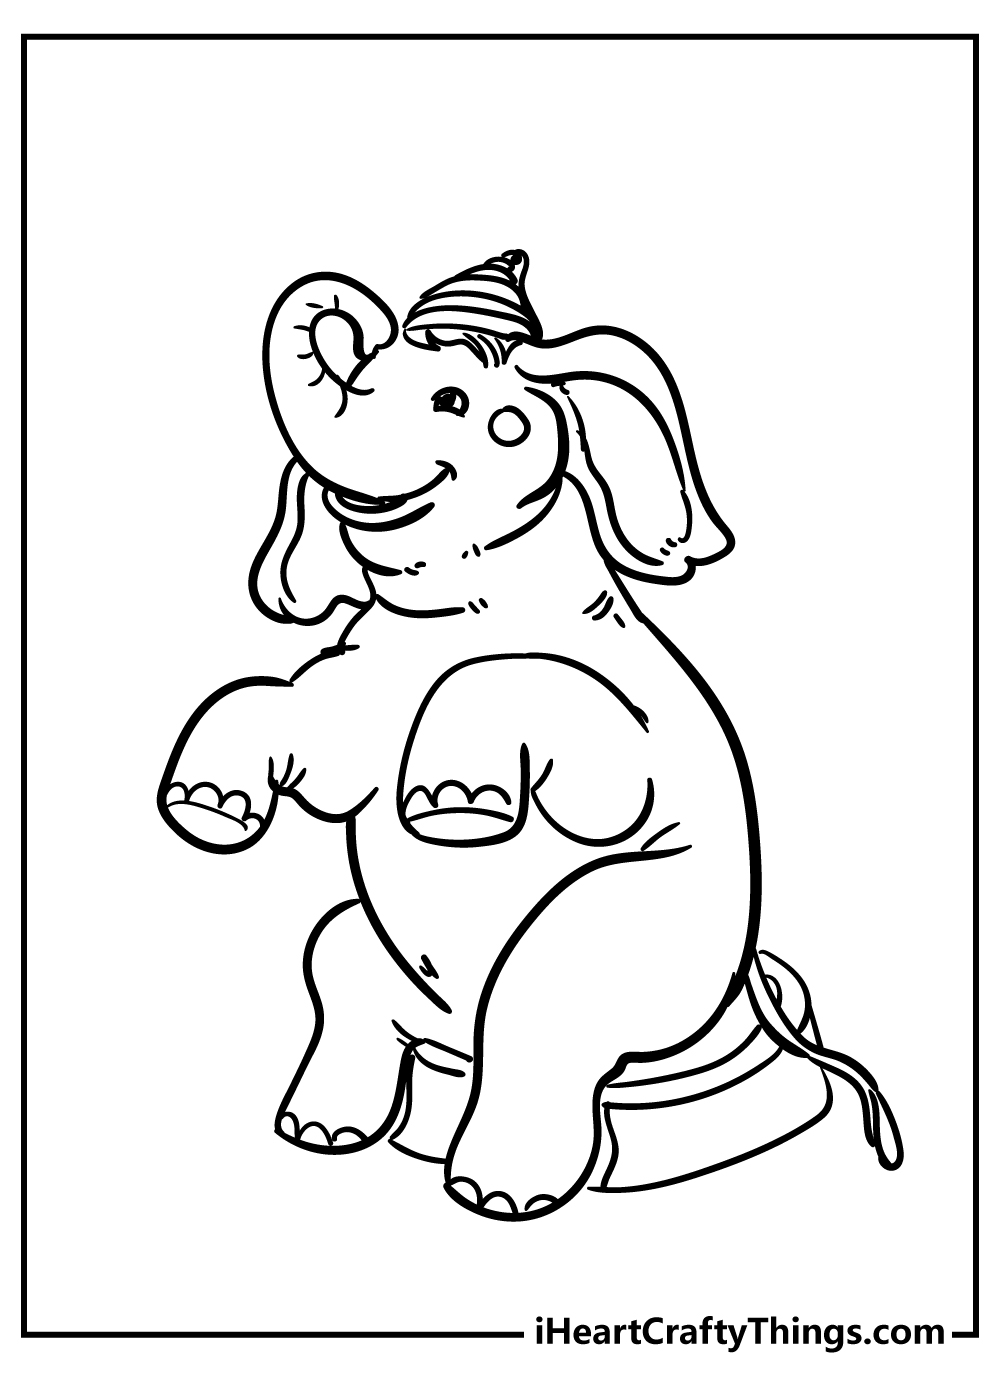 Circus Coloring Sheet for children free download